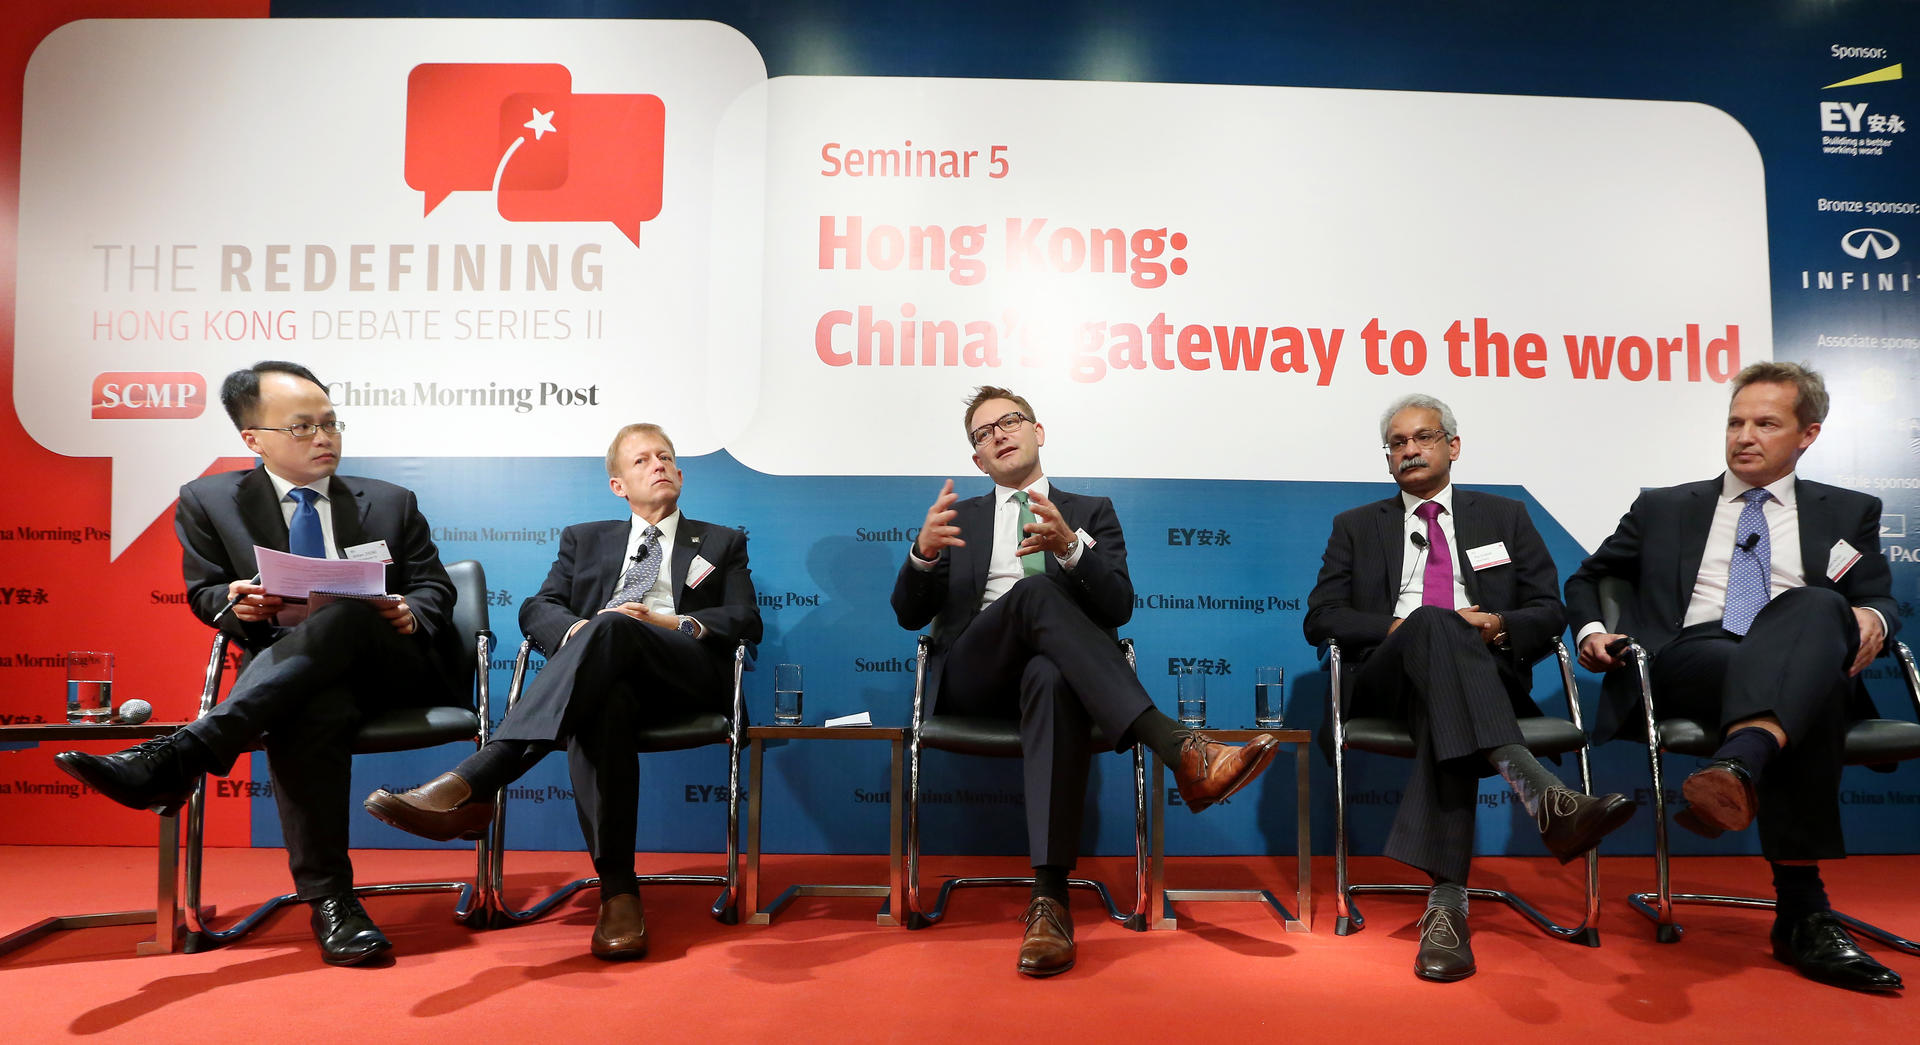 From left, the Post's William Zheng, EY's Bob Partridge, Ian Bolin from Infiniti, Digital Realty's Kris Kumar and Cathay Pacific's Rupert Hogg discuss the problems facing Hong Kong. Photo: Sam Tsang